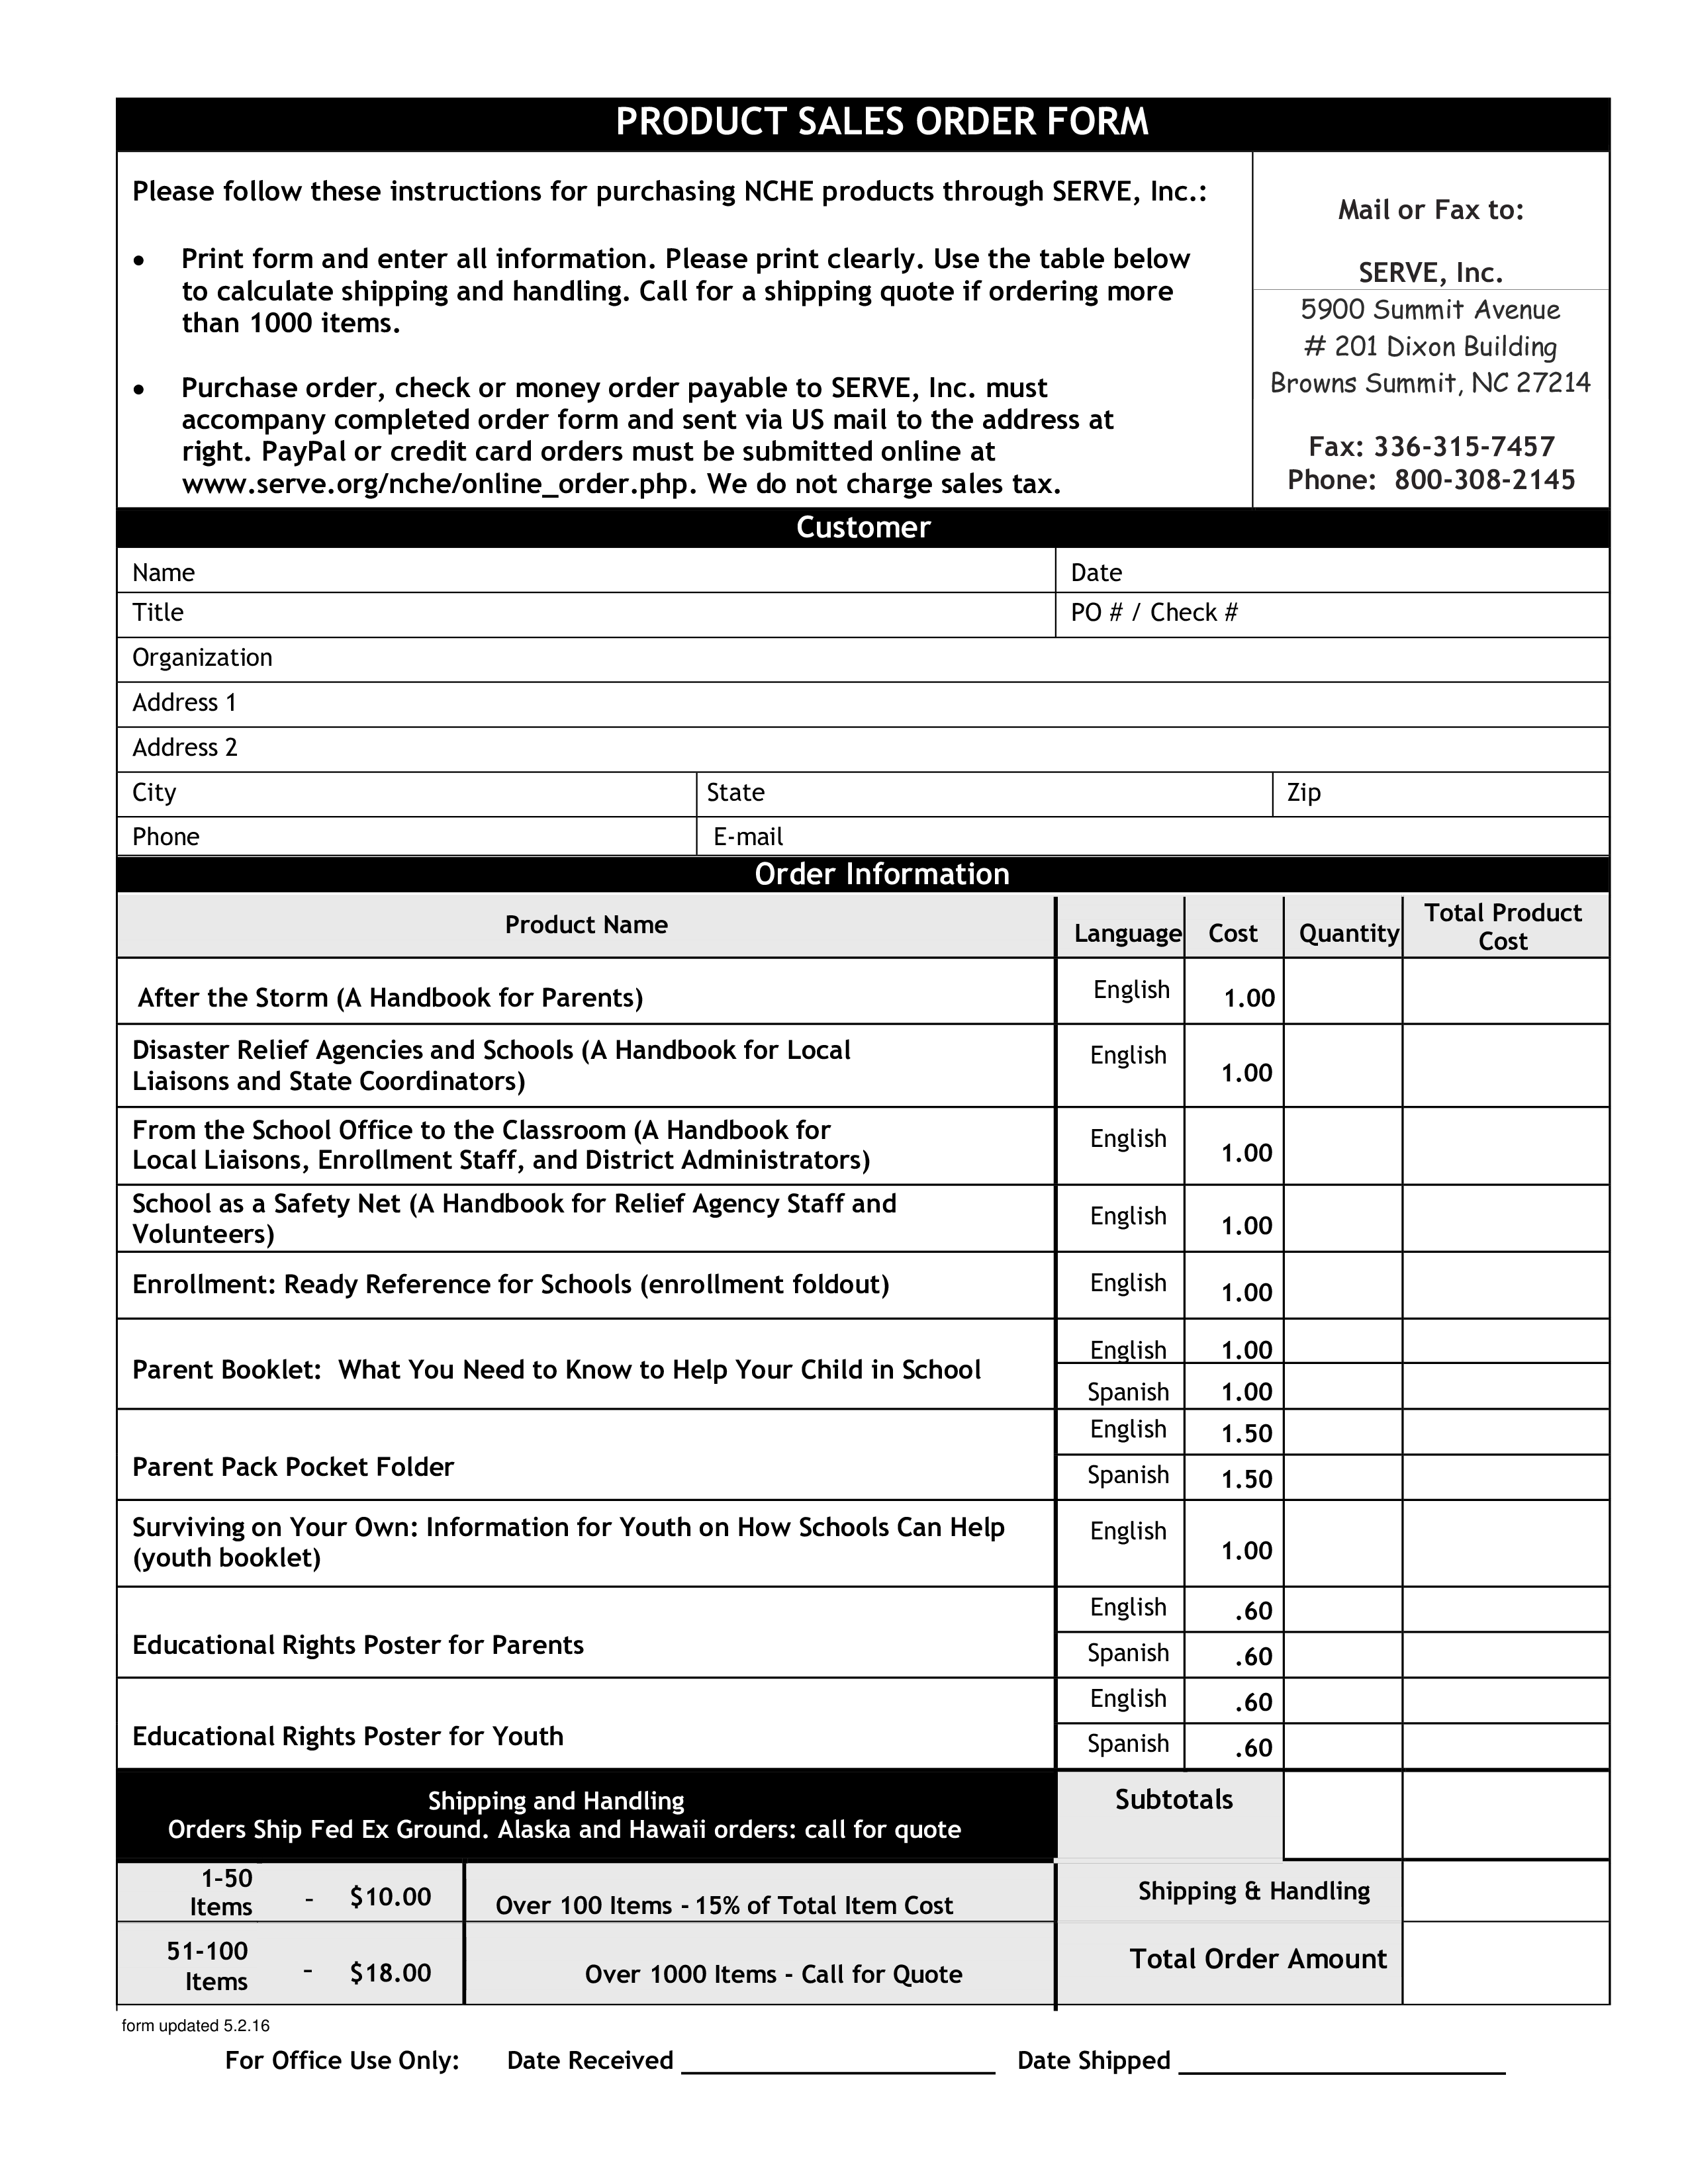 product order form template